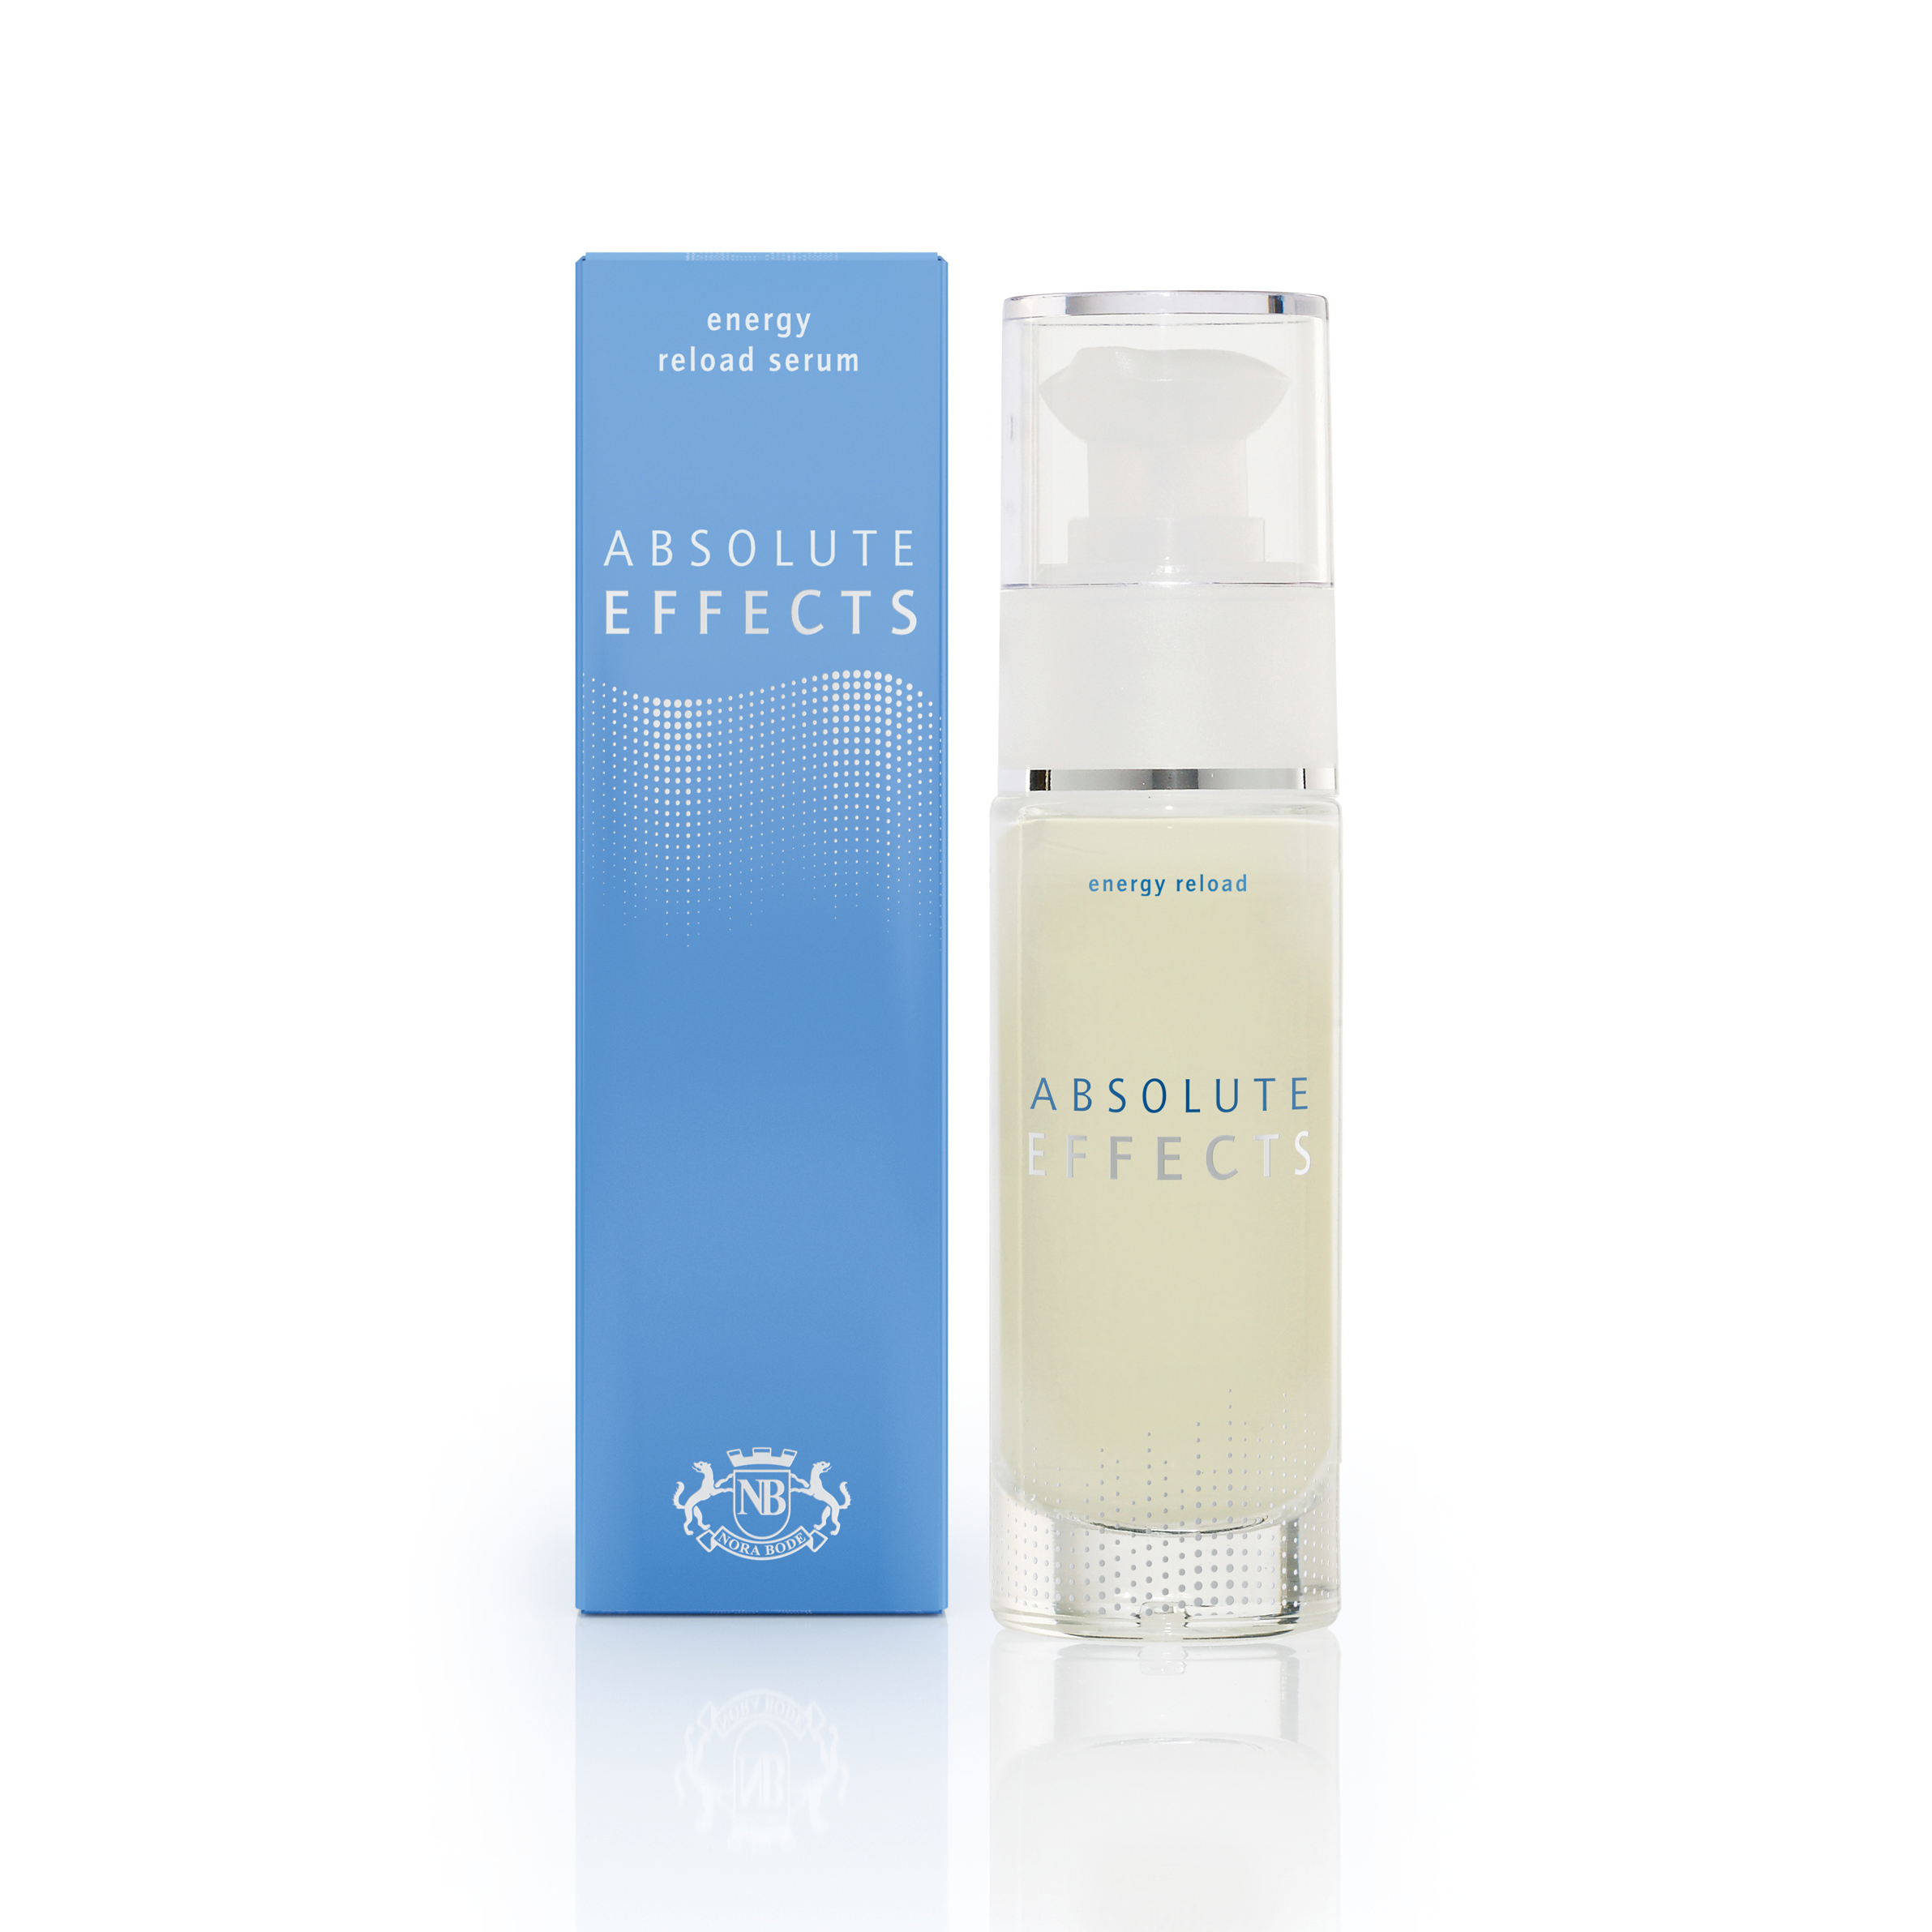 ABSOLUTE EFFECTS energy reload serum